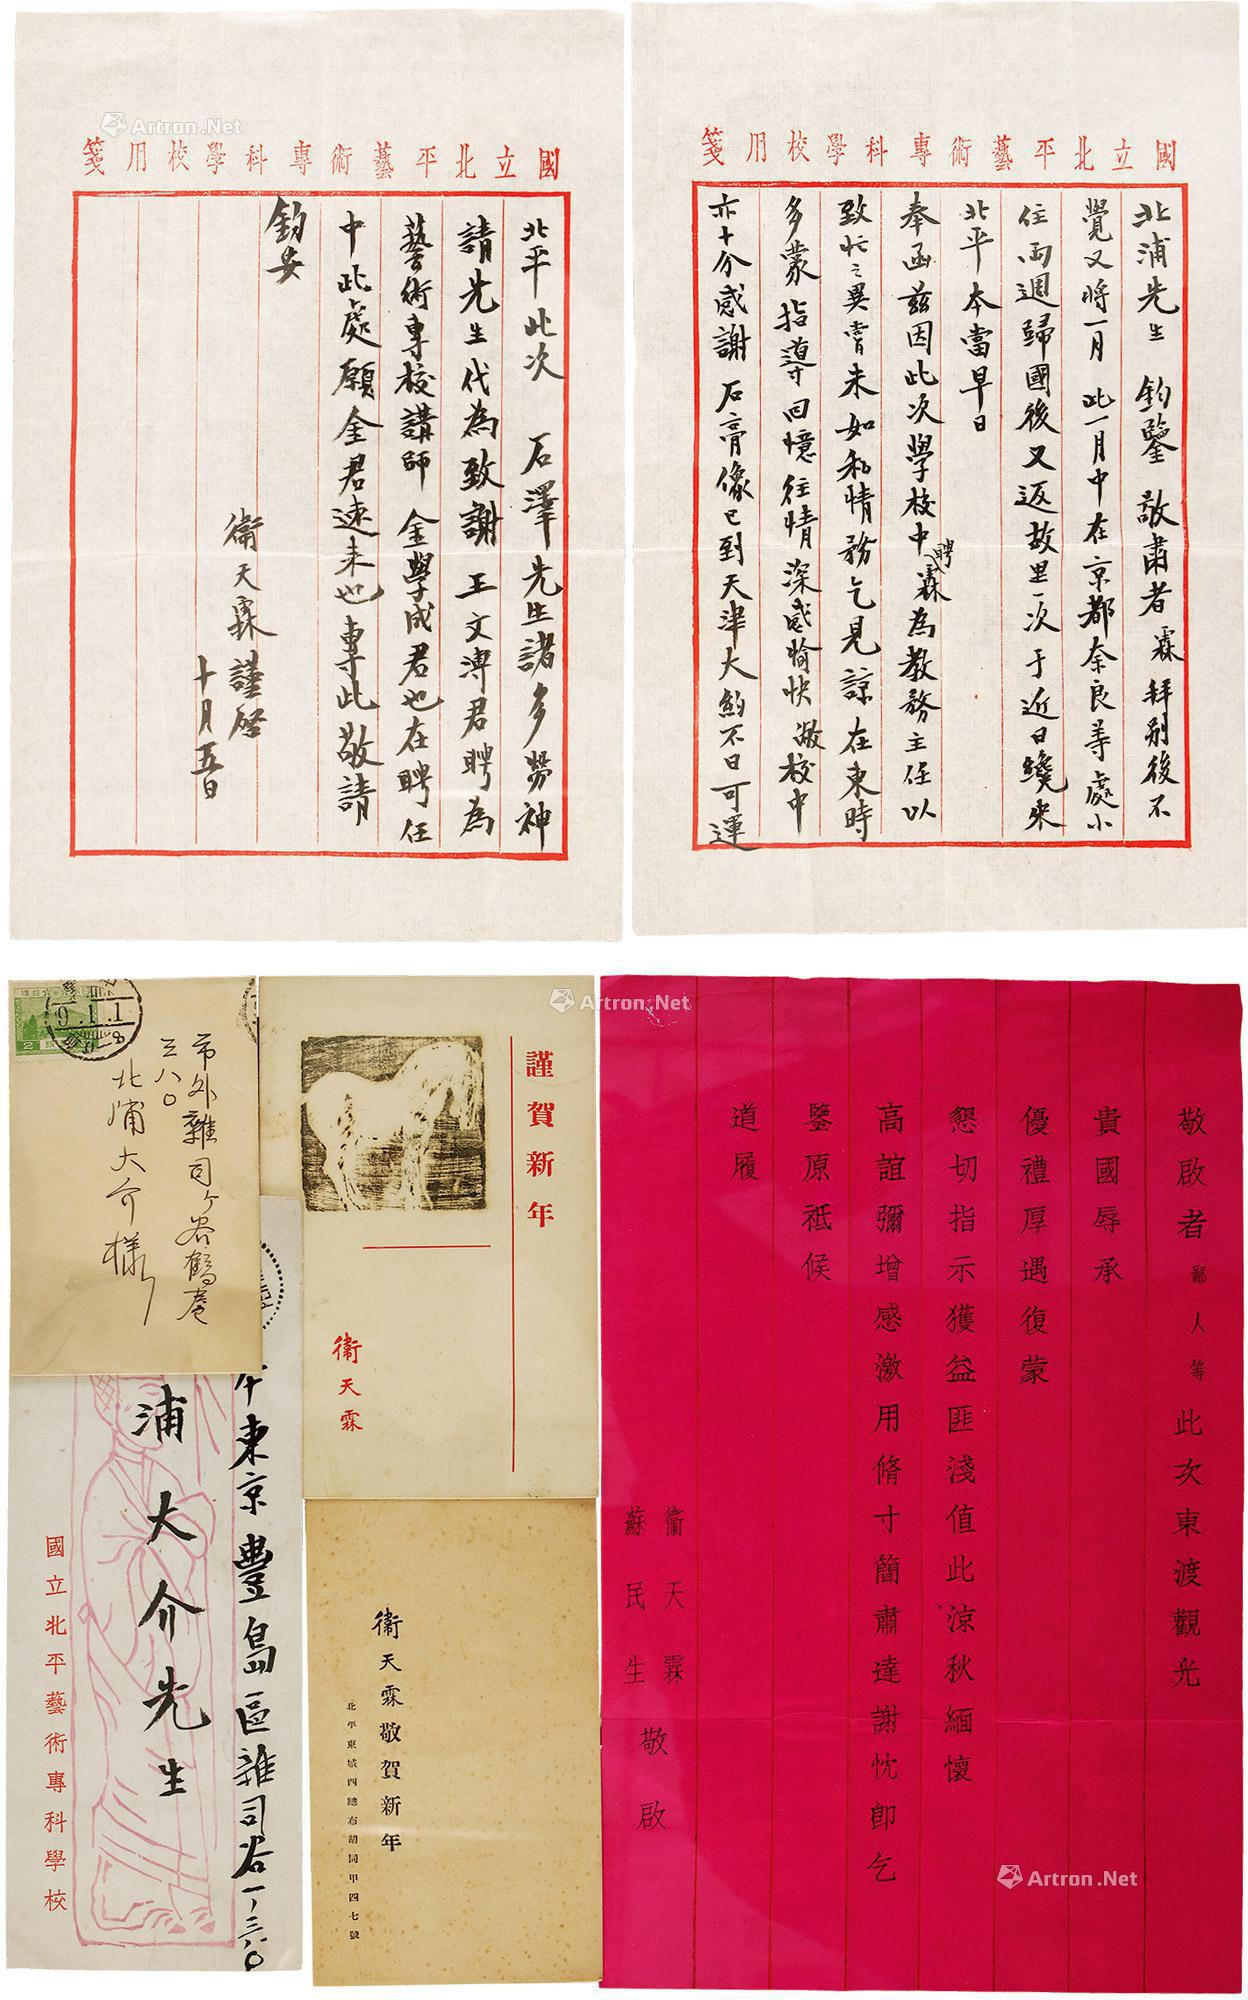 Group of letters， greeting card invitation and postcard of Wei Tianlin， with original covers